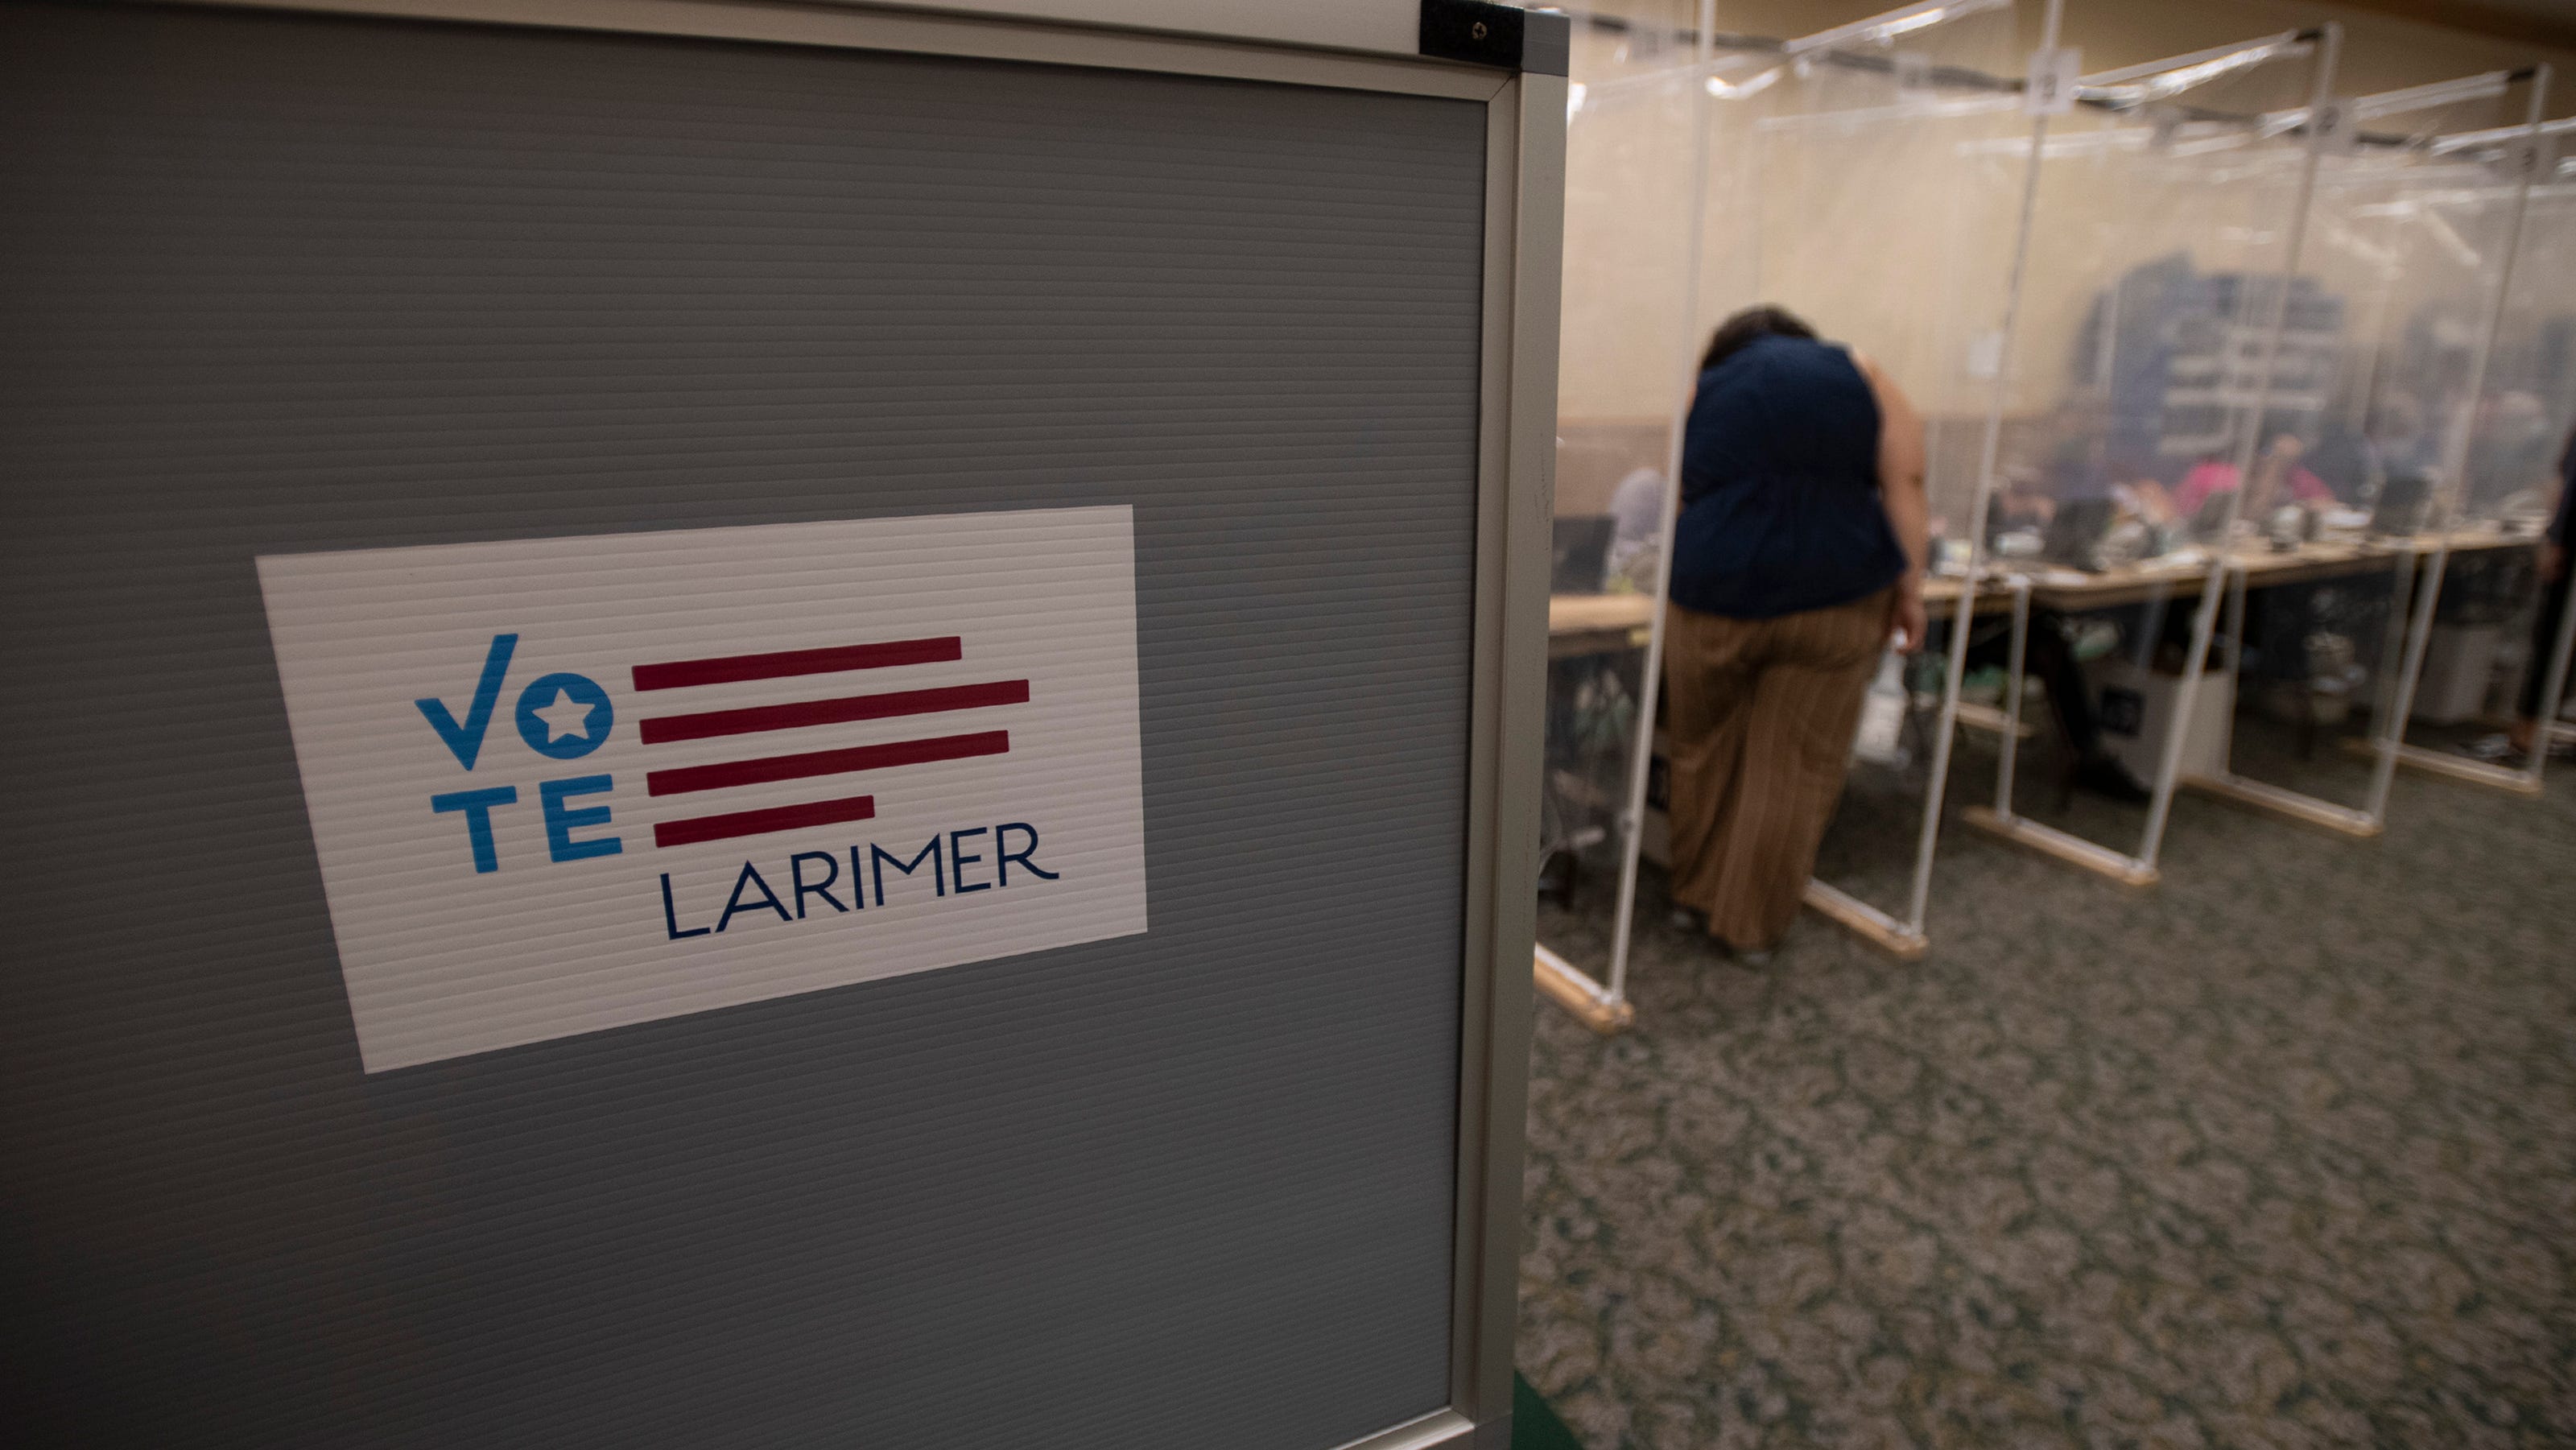 2020 election results Here's how Larimer County voted on the issues